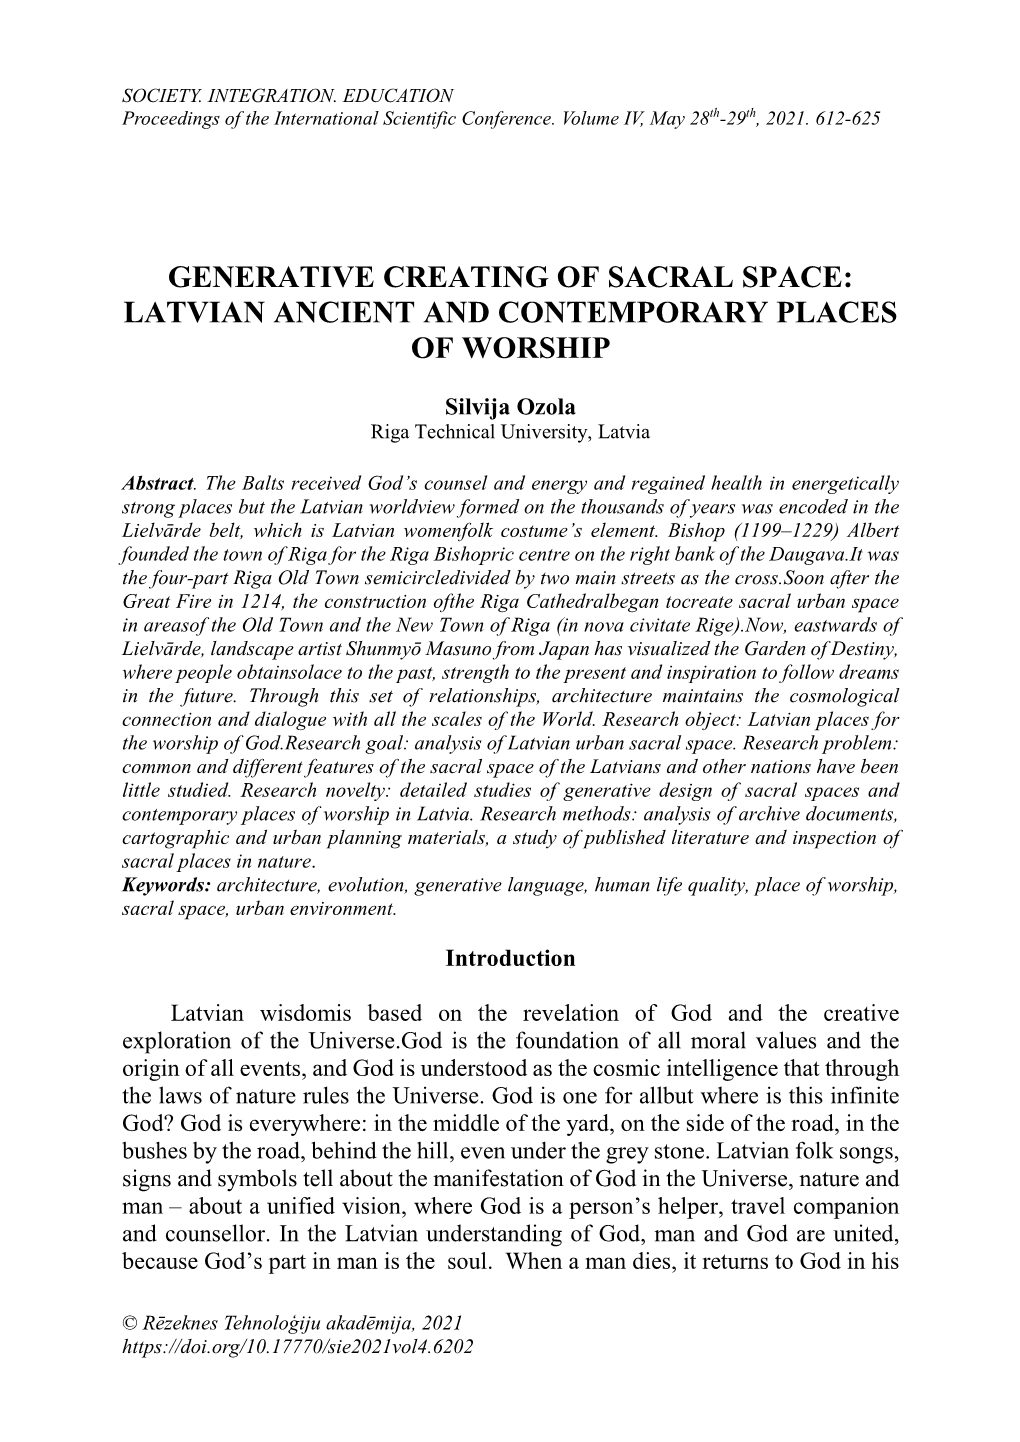 Generative Creating of Sacral Space: Latvian Ancient and Contemporary Places of Worship